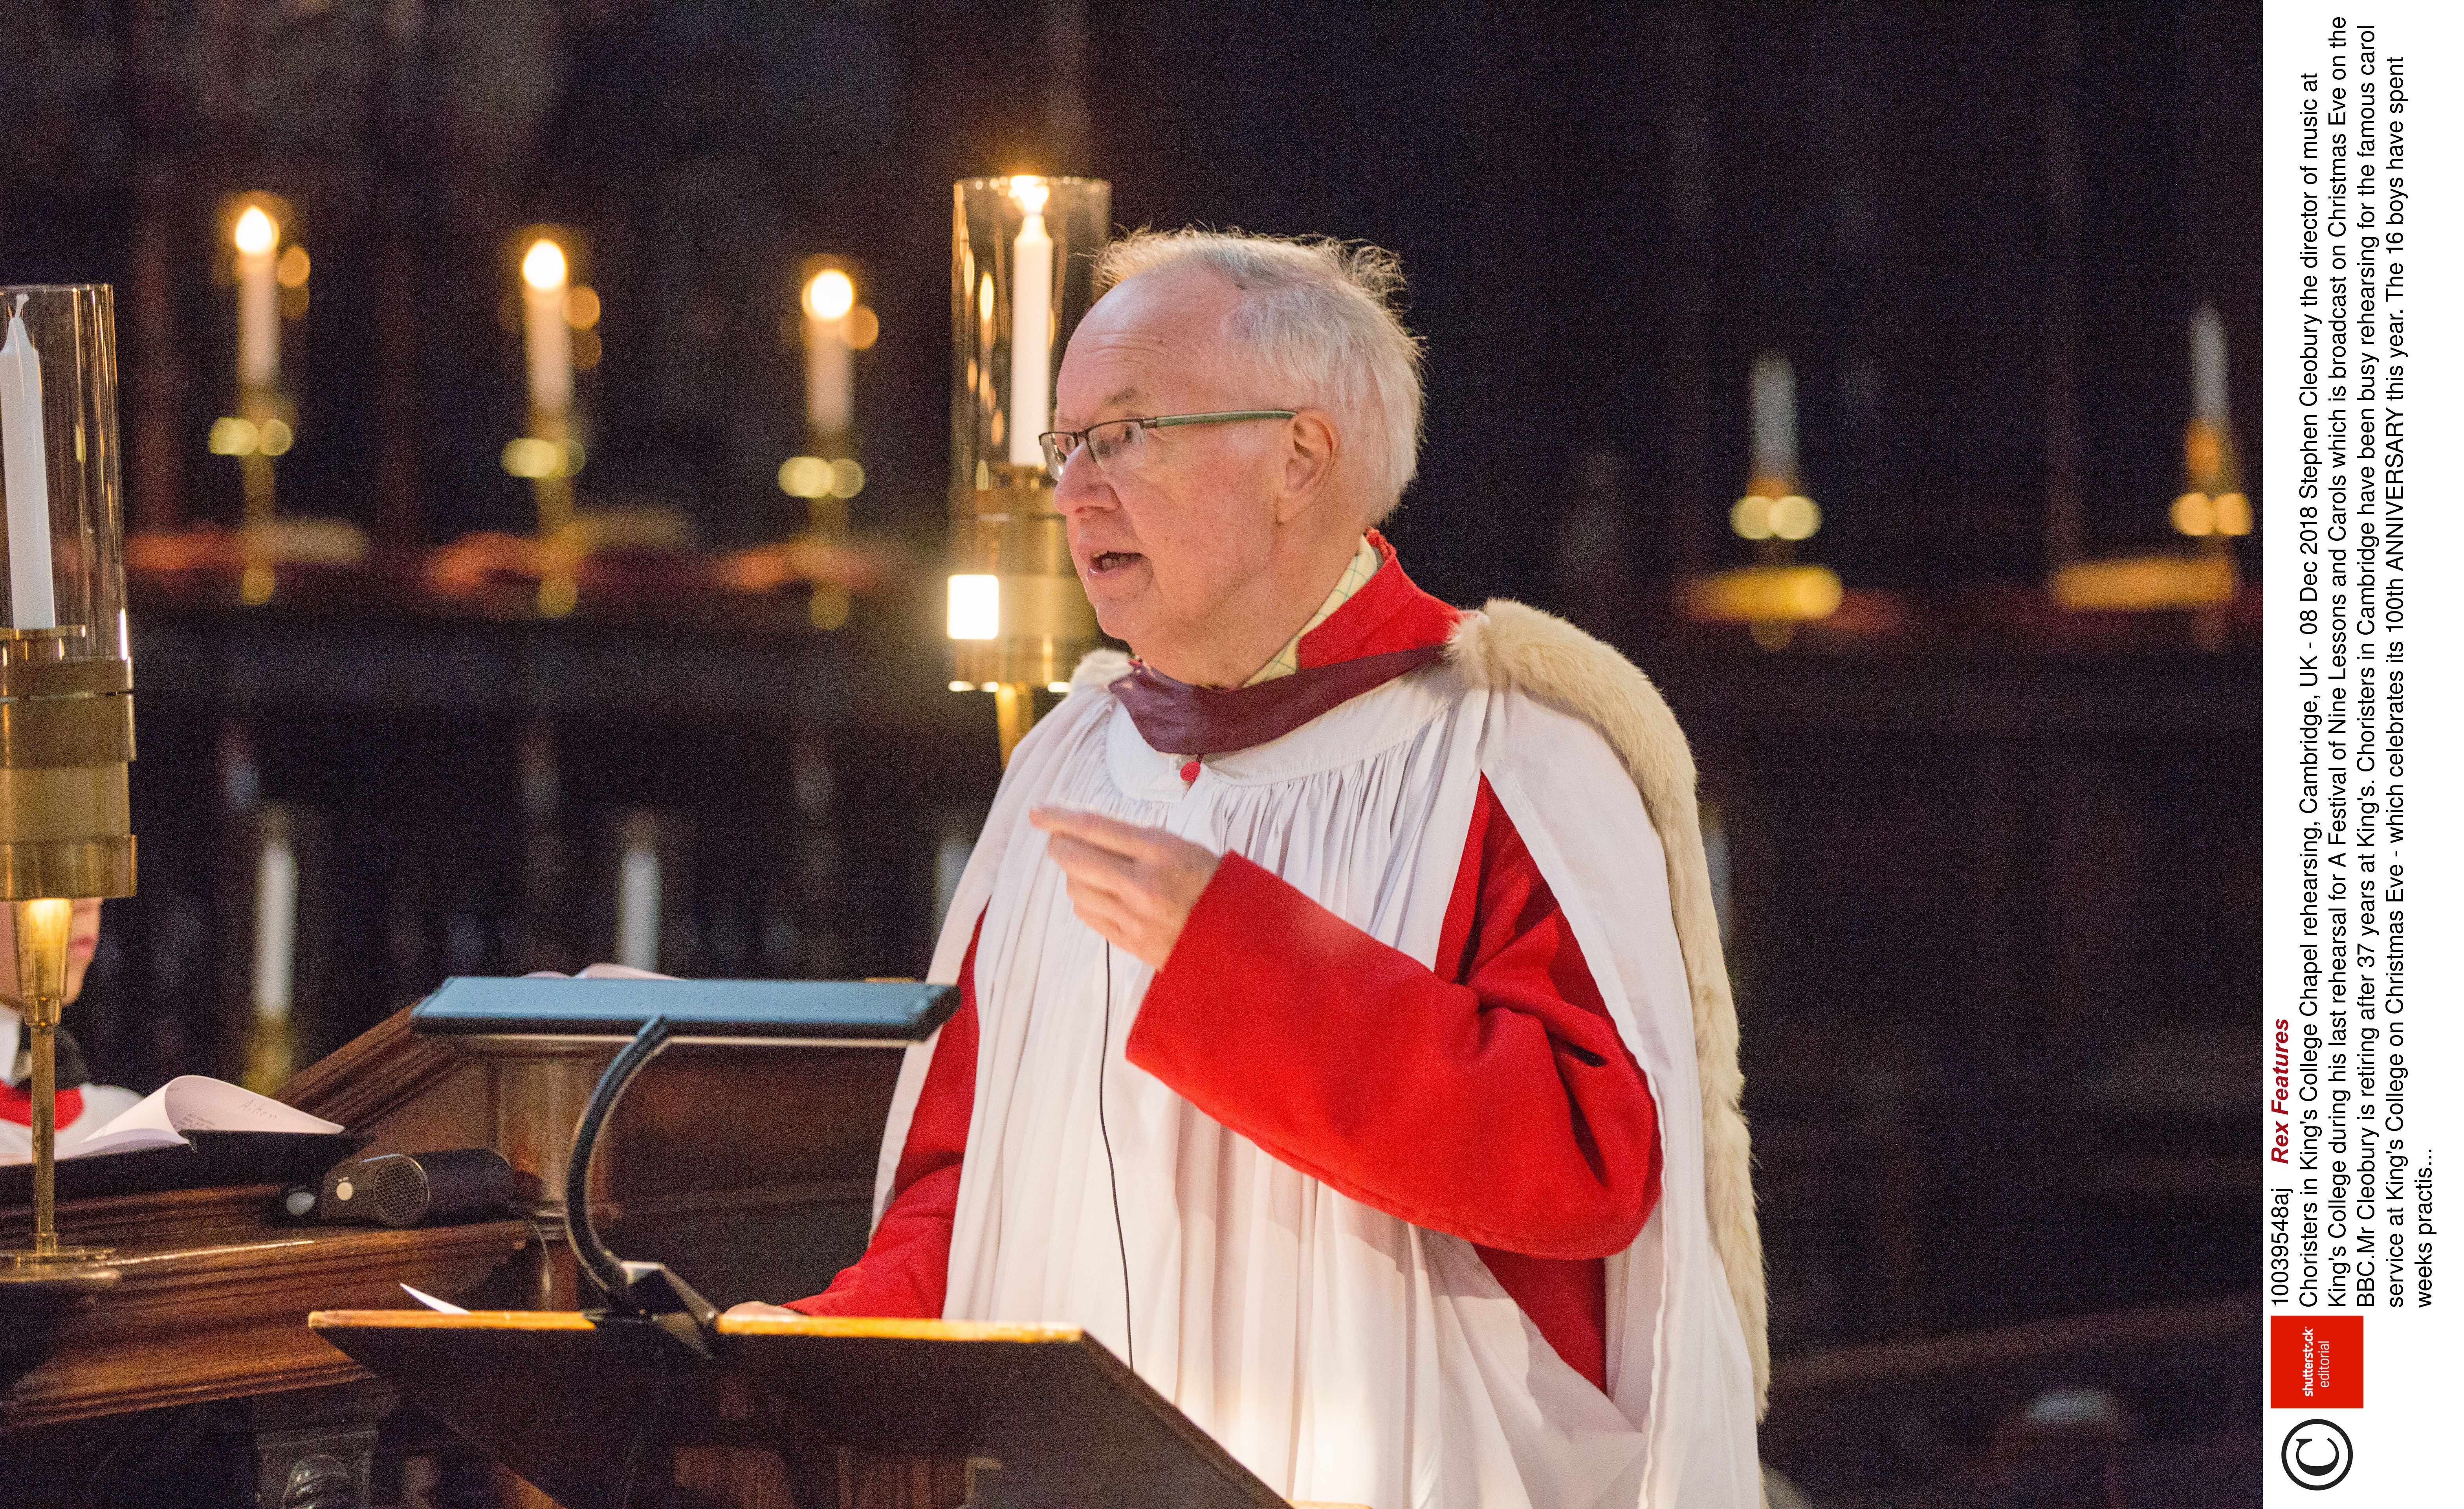 The late Sir Stephen Cleobury conducted the choir of King’s College, Cambridge, for 35 years